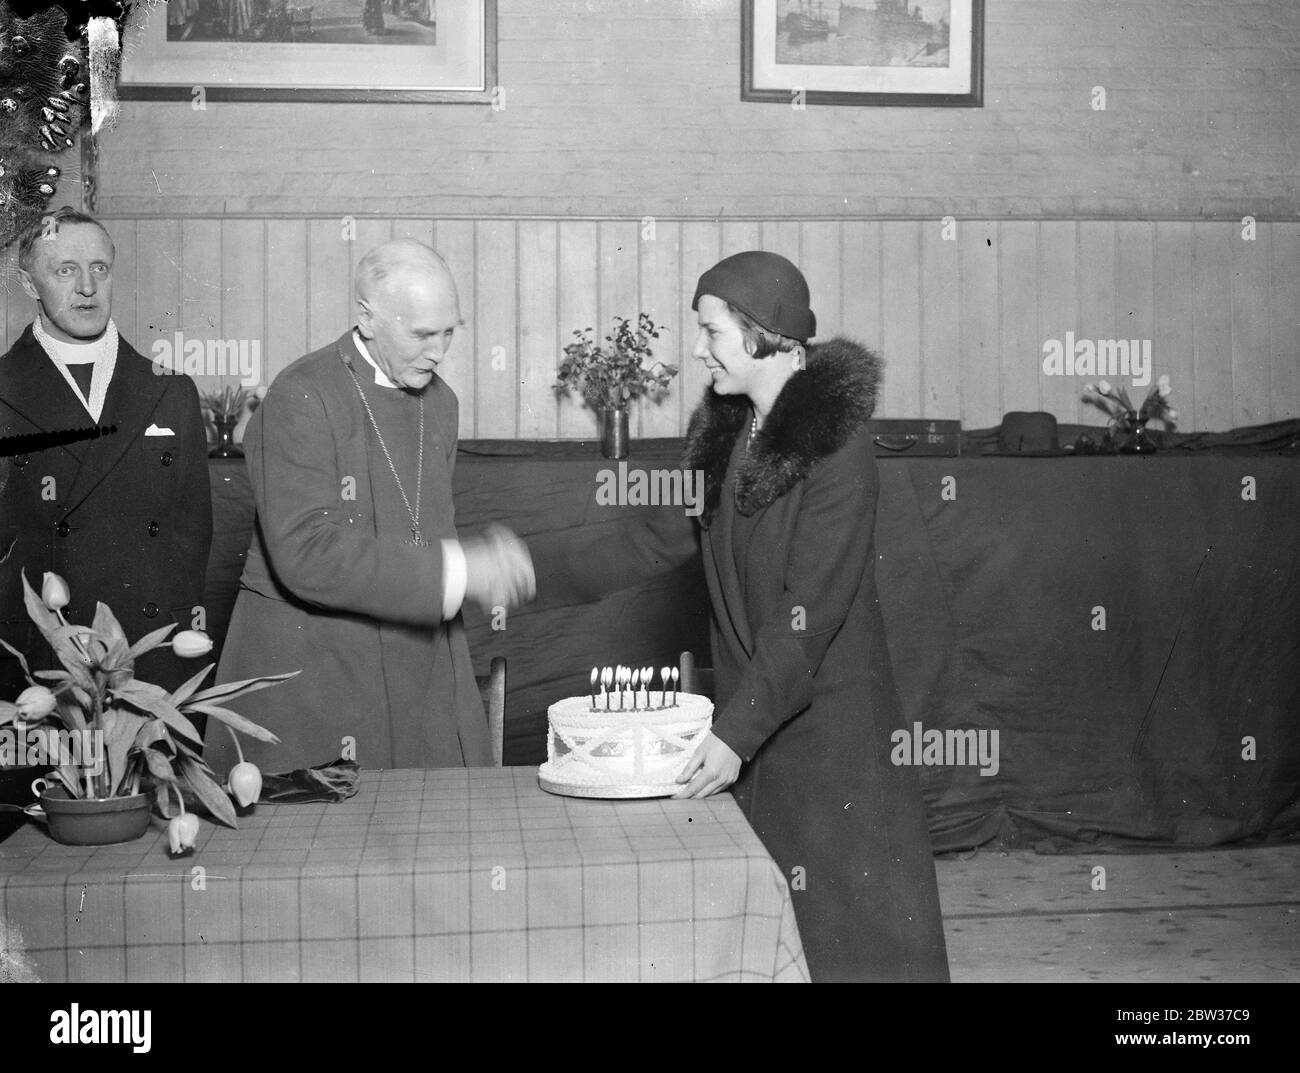 Bishop of London presented with birthday cake . The Bishop of London was presented with a birthday cake in celebration of his 74th birthday when he conducted the centenary service at the church of St John the Evangelist at Paddington , London . The presentation was made by Miss Muriel Closier who celebrated her seventeenth birthday the same day . Photo shows , Miss Muriel Closier presenting the birthday cake to the Bishop of London . 27 January 1932 Stock Photo